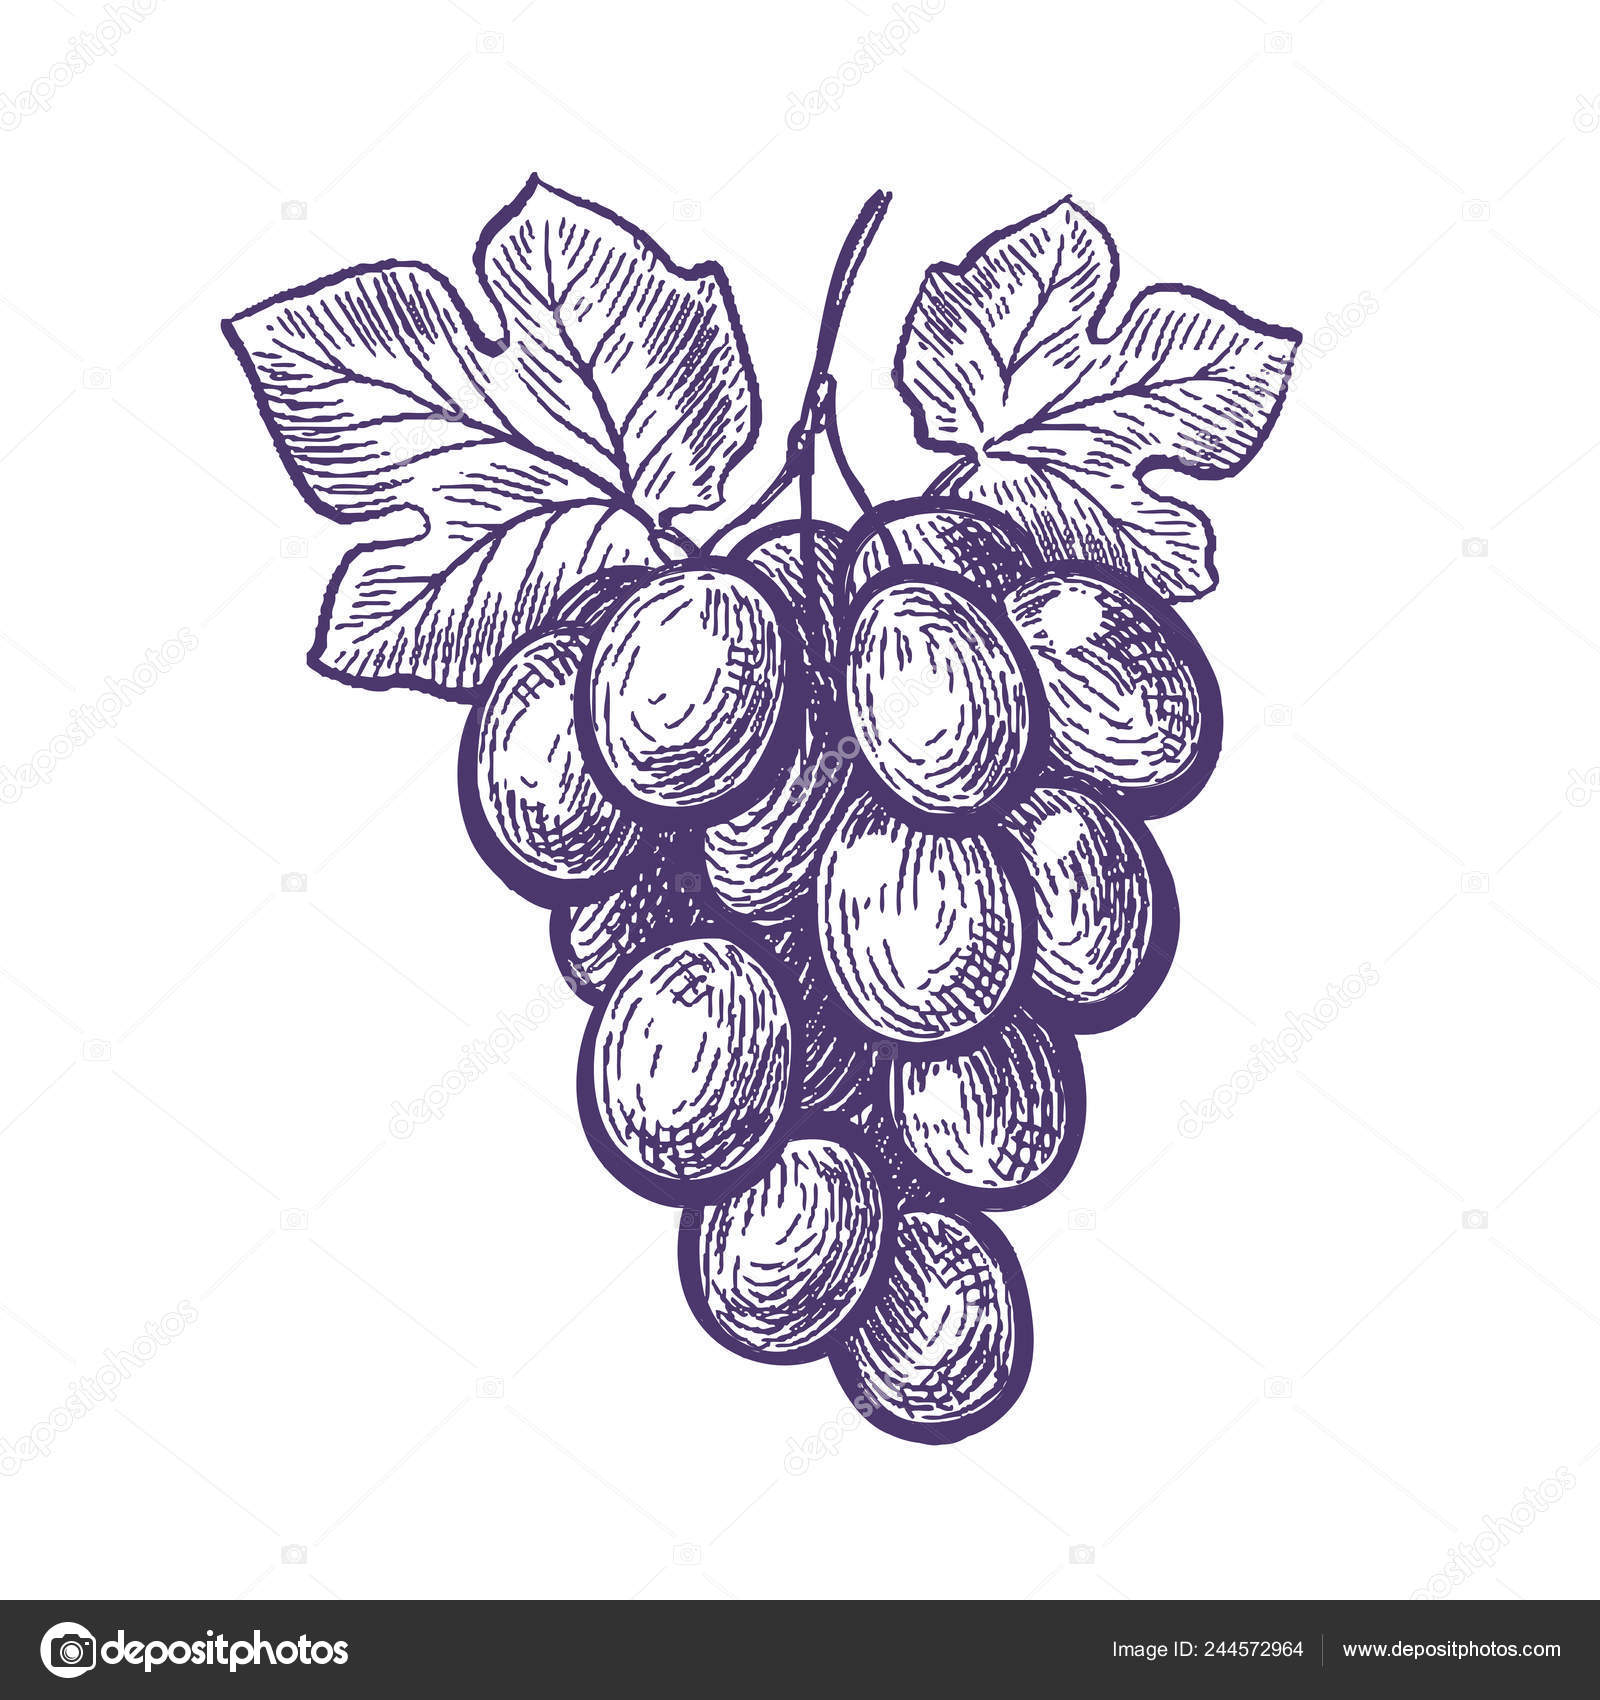 How to Draw Grapes in 12 Easy Steps - VerbNow